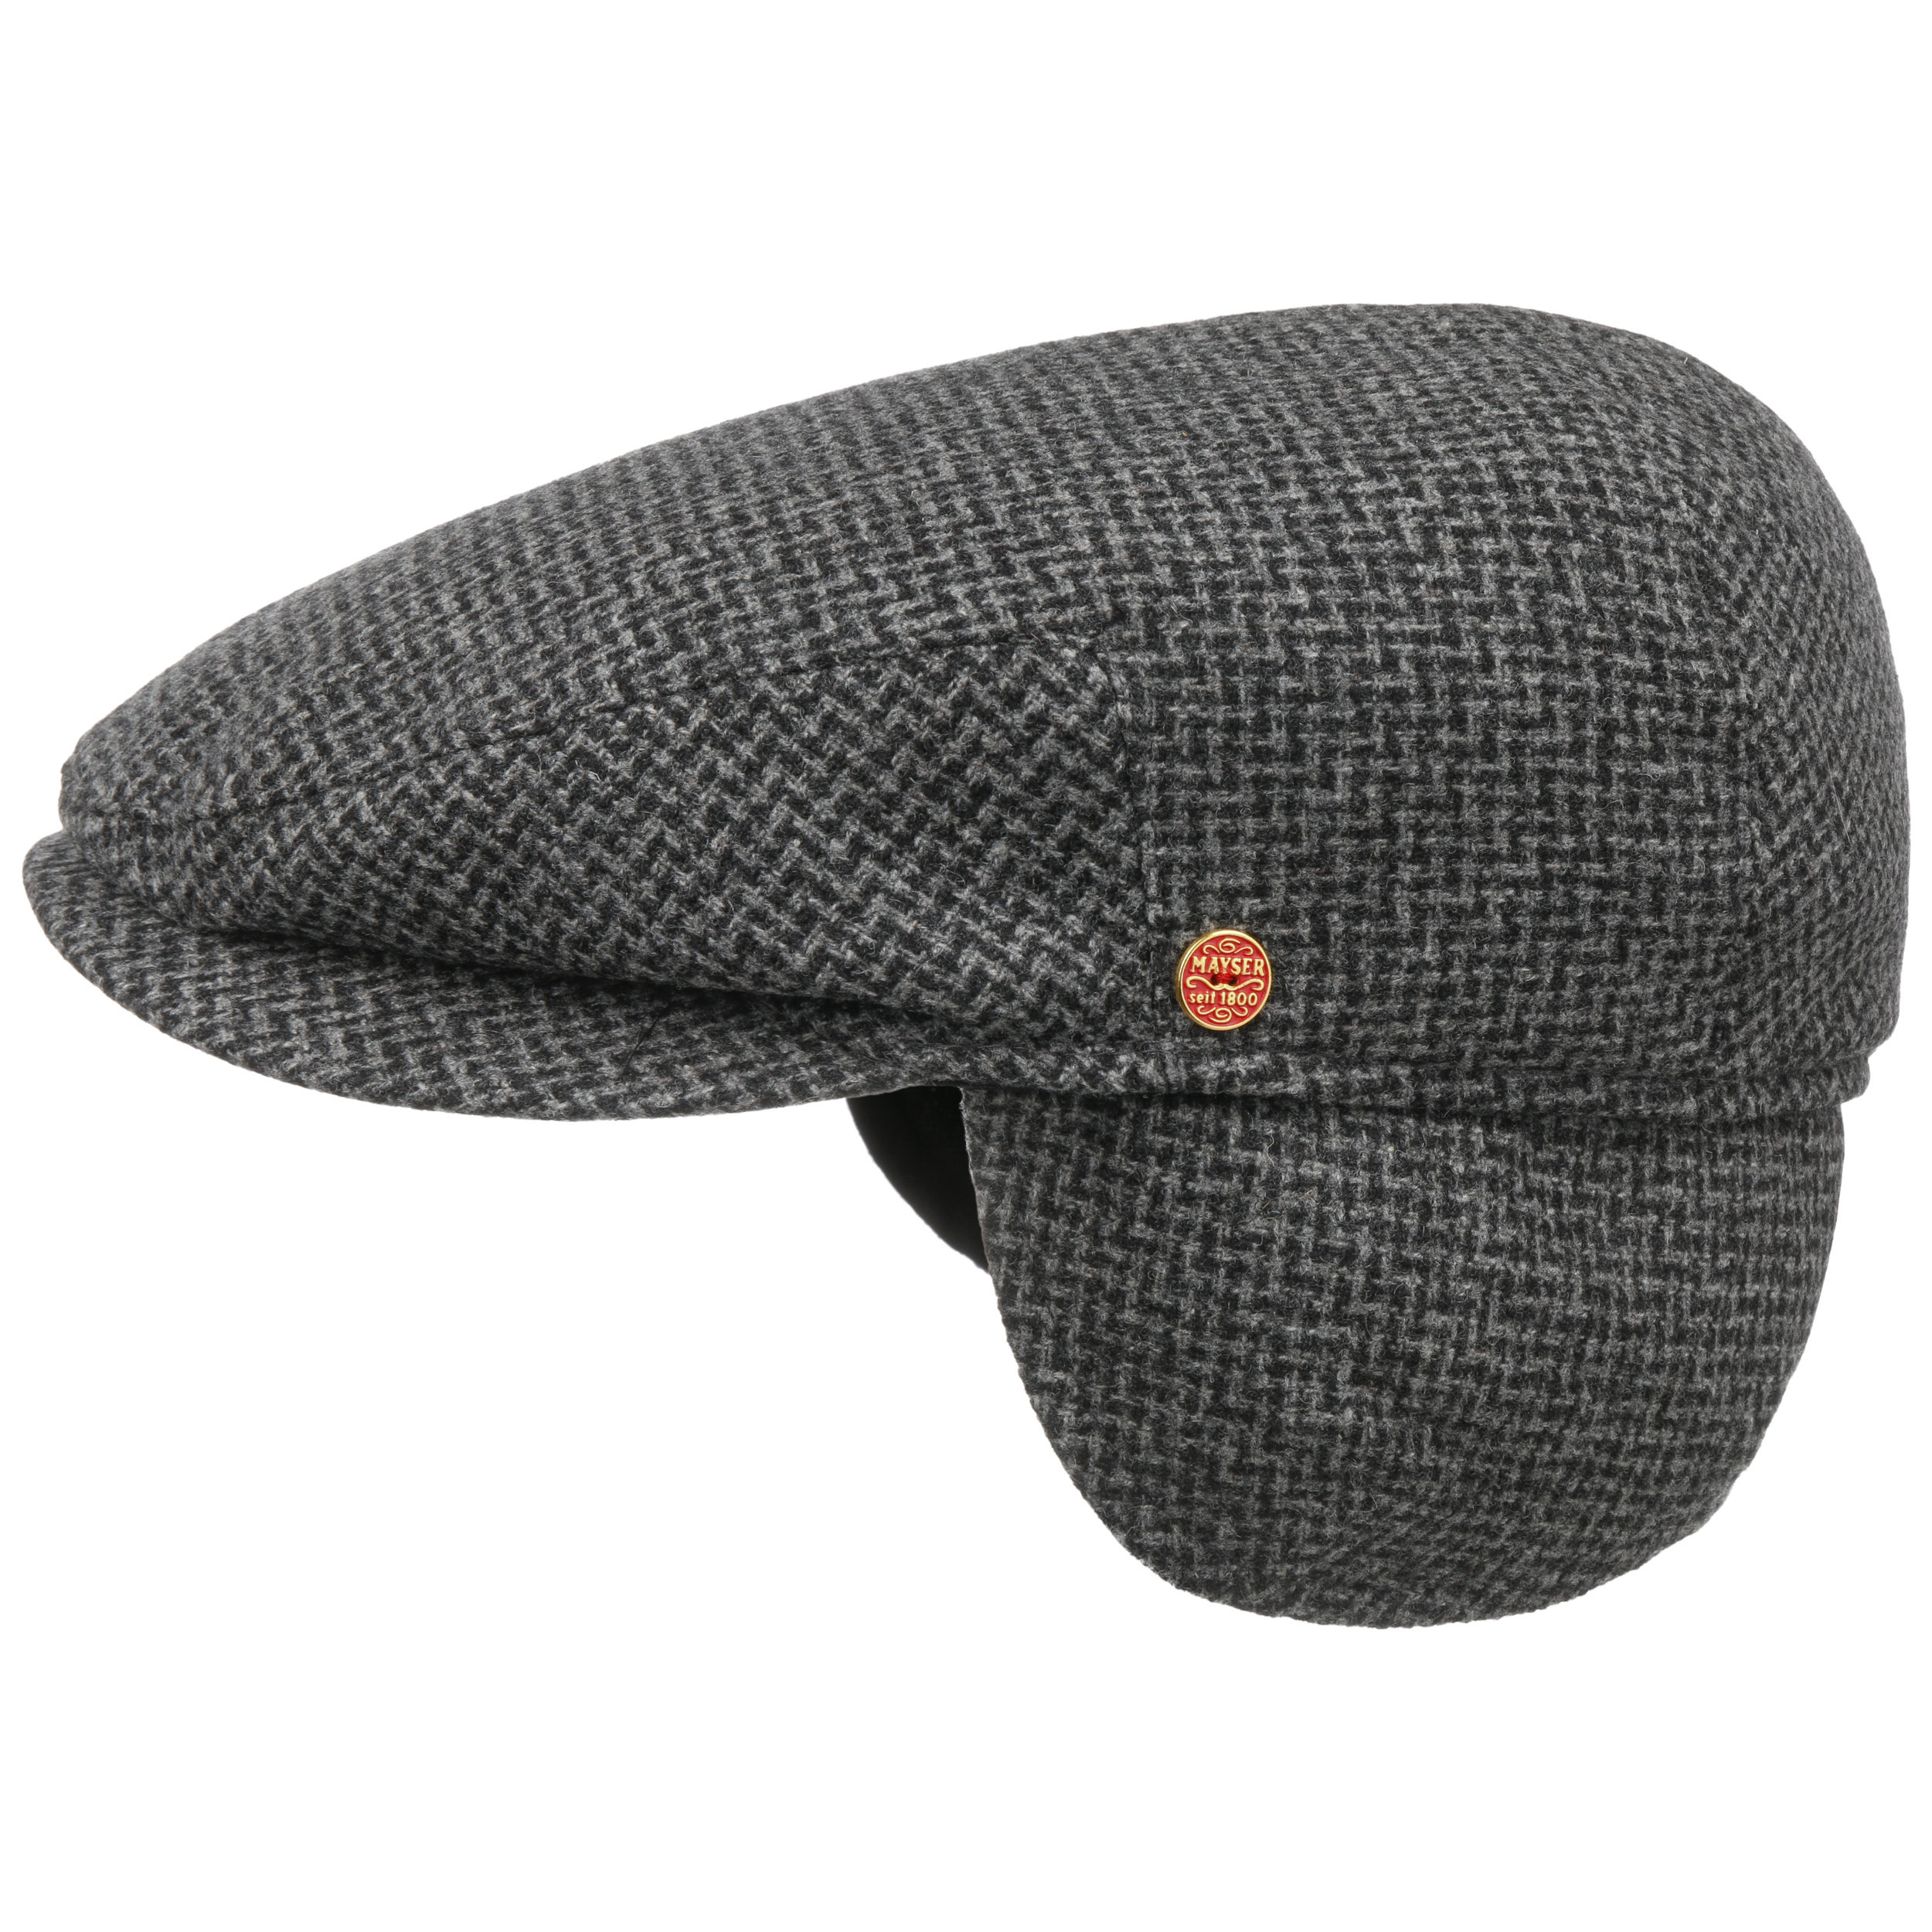 Merlino Zigzag Flat Cap with Ear Flaps by Mayser - 113,95 €